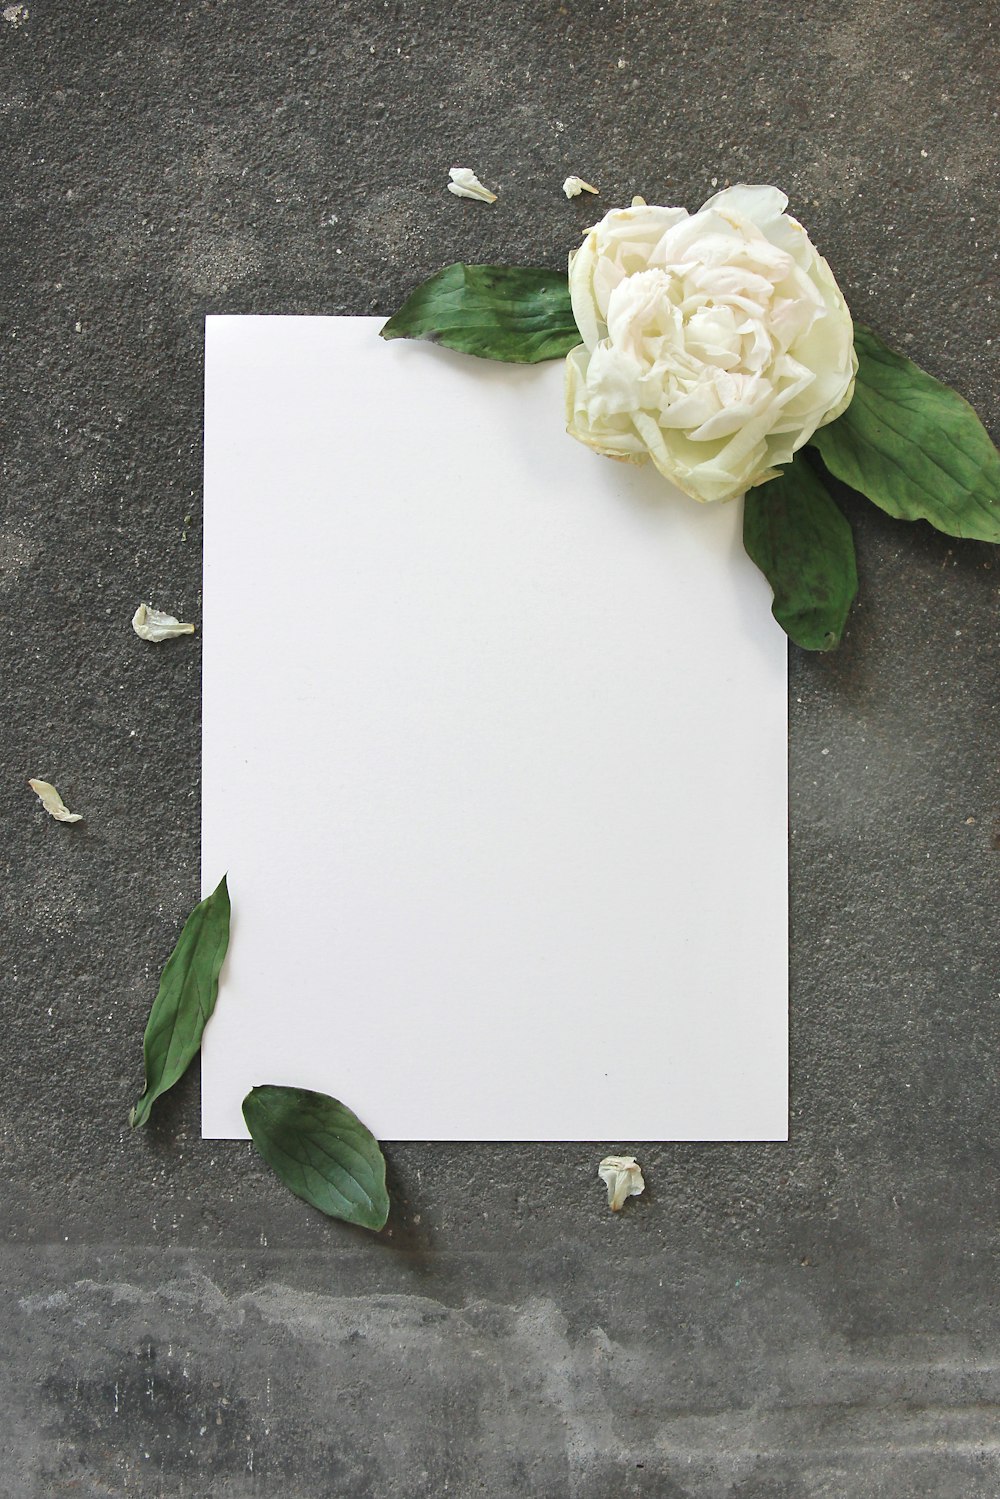 a white rose on a white square